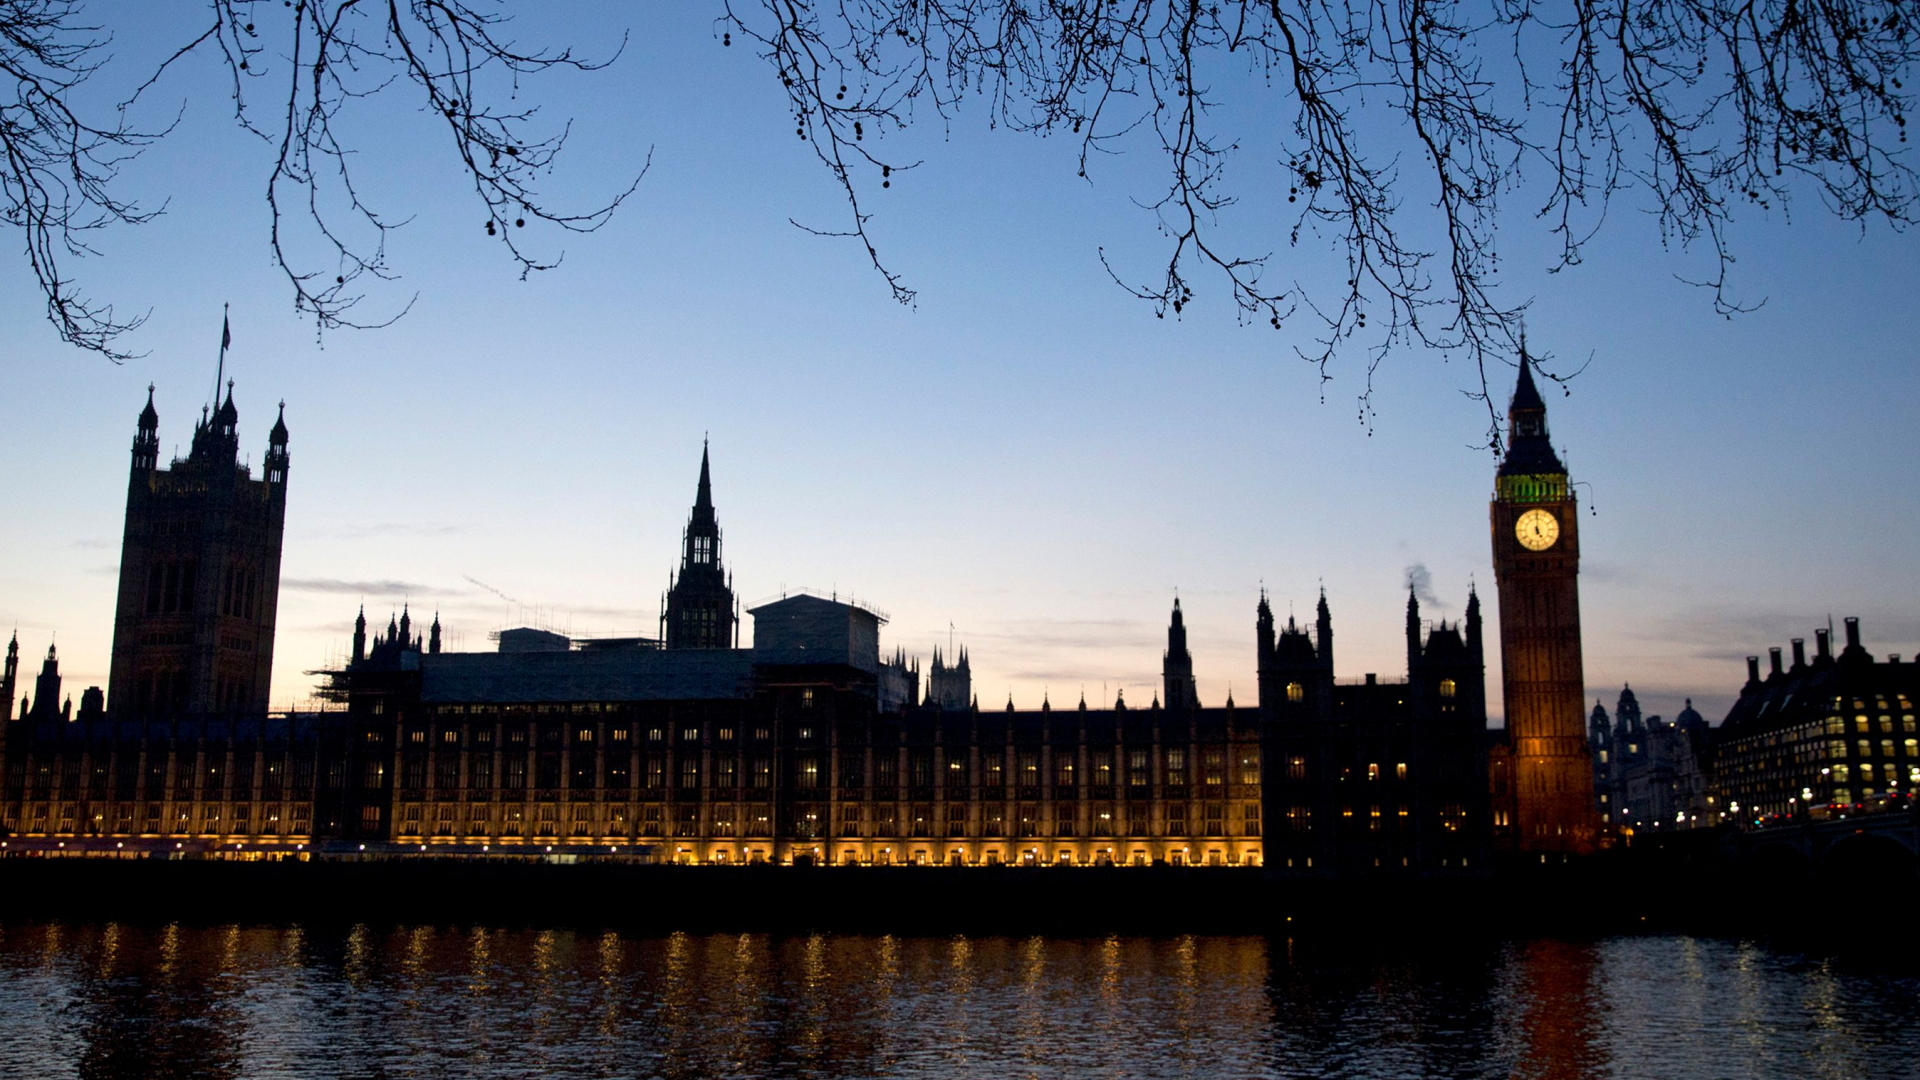 Turm des Westminster-Palasts in London